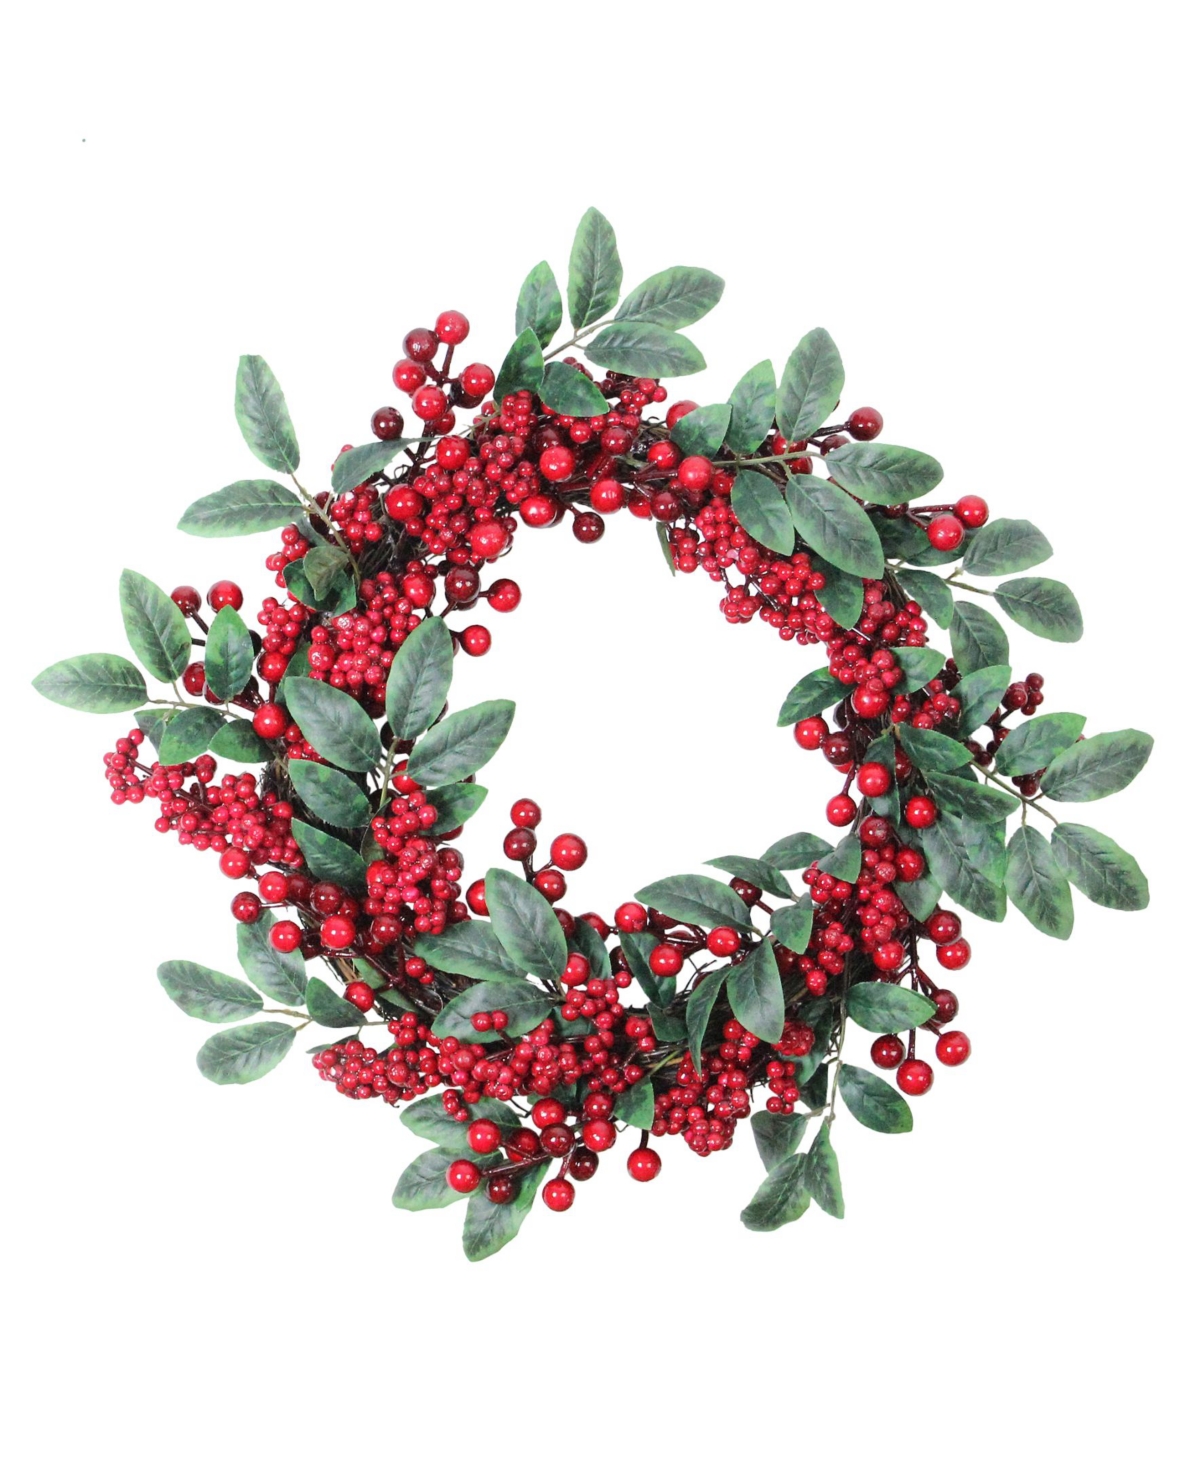 18" Artificial Lush Red Berry and Deep Green Leaf Decorative Christmas Wreath - Unlit - Green